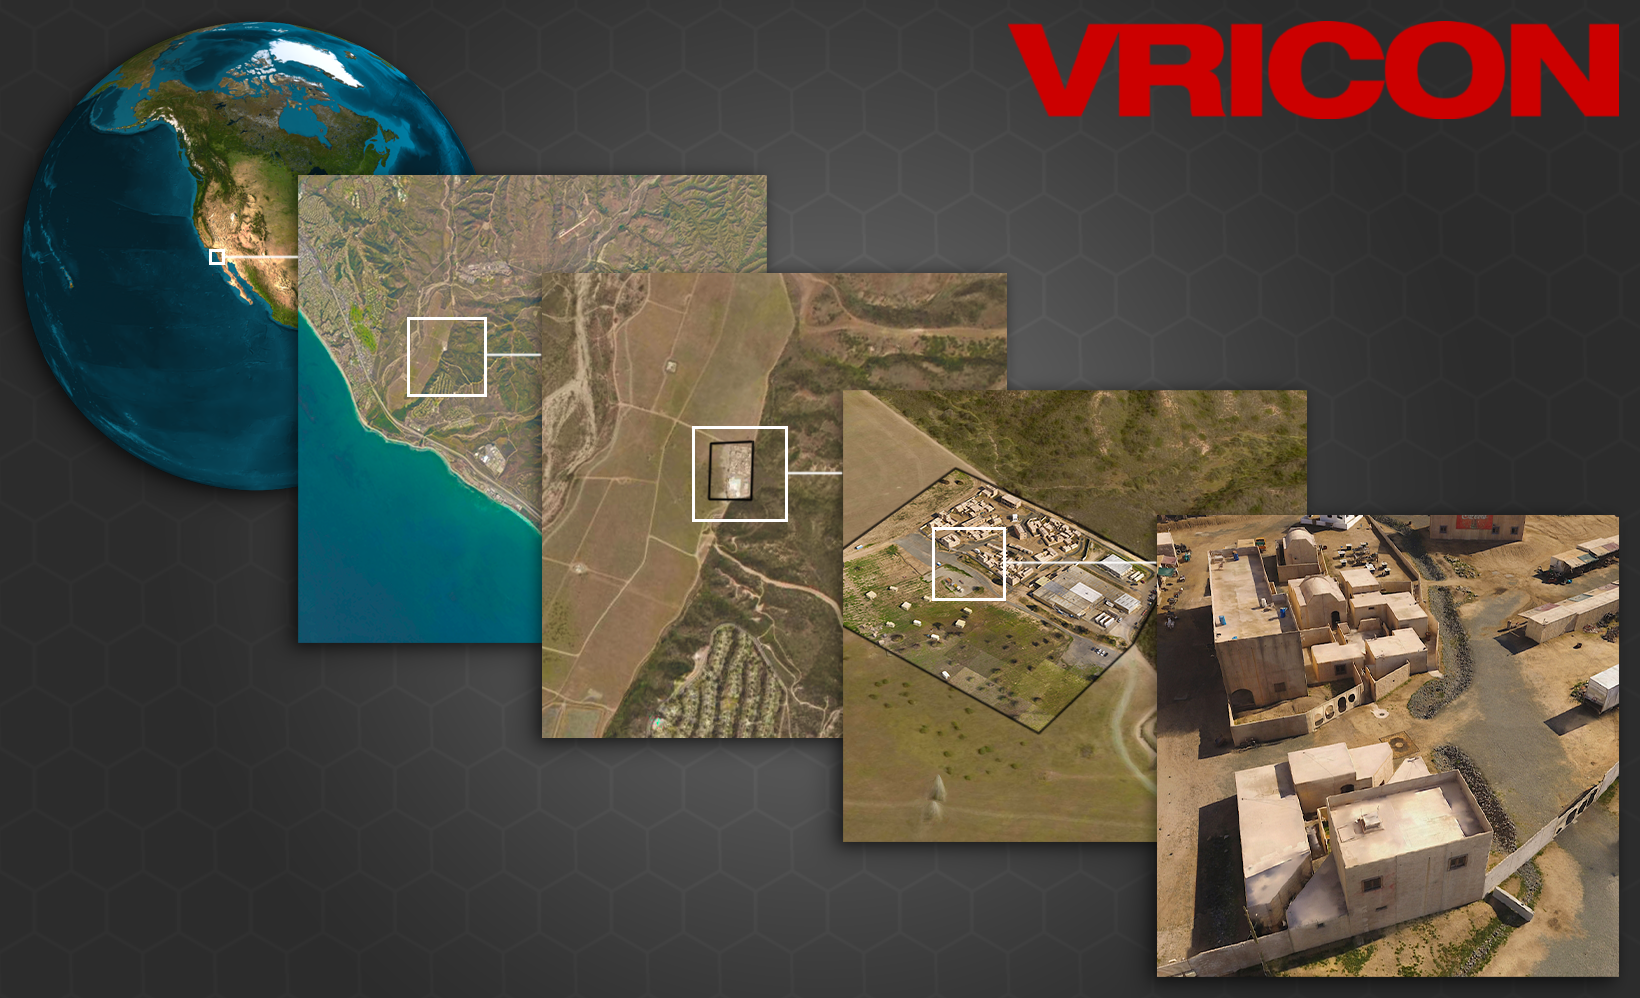 Example rendering of Vricon OWT foundation data with automatically geo-registered and fused data from local drone-based terrain survey to illustrate zoomed levels-of-detail from space down to centimeter-level urban terrain.